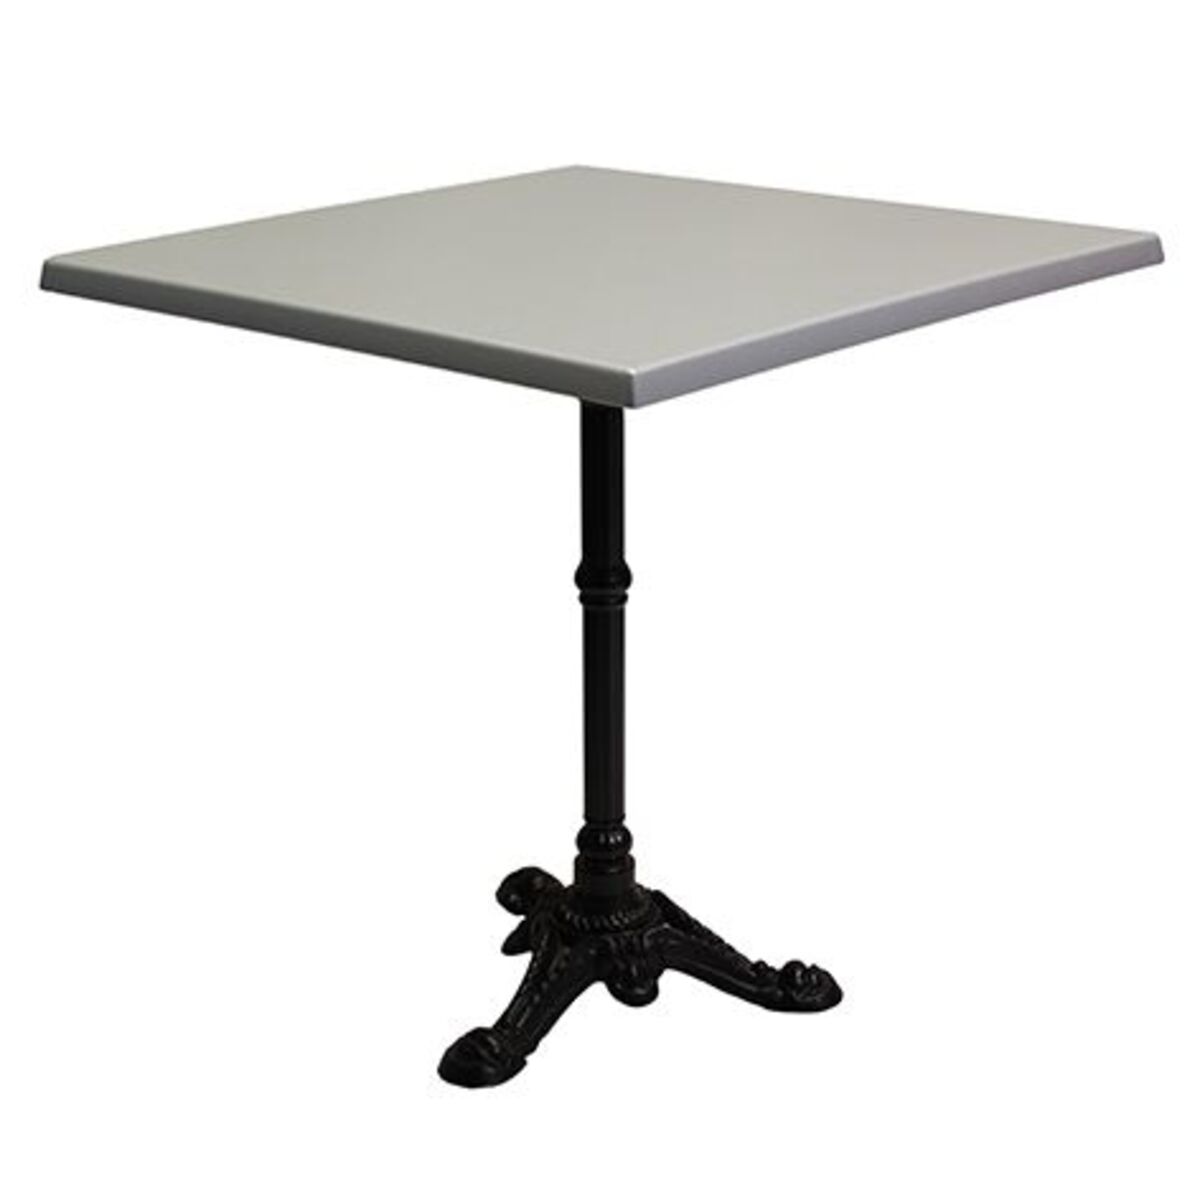 Table int. Pied fonte 3 branches bistrot & plateau werzalit gris 60x60 cm